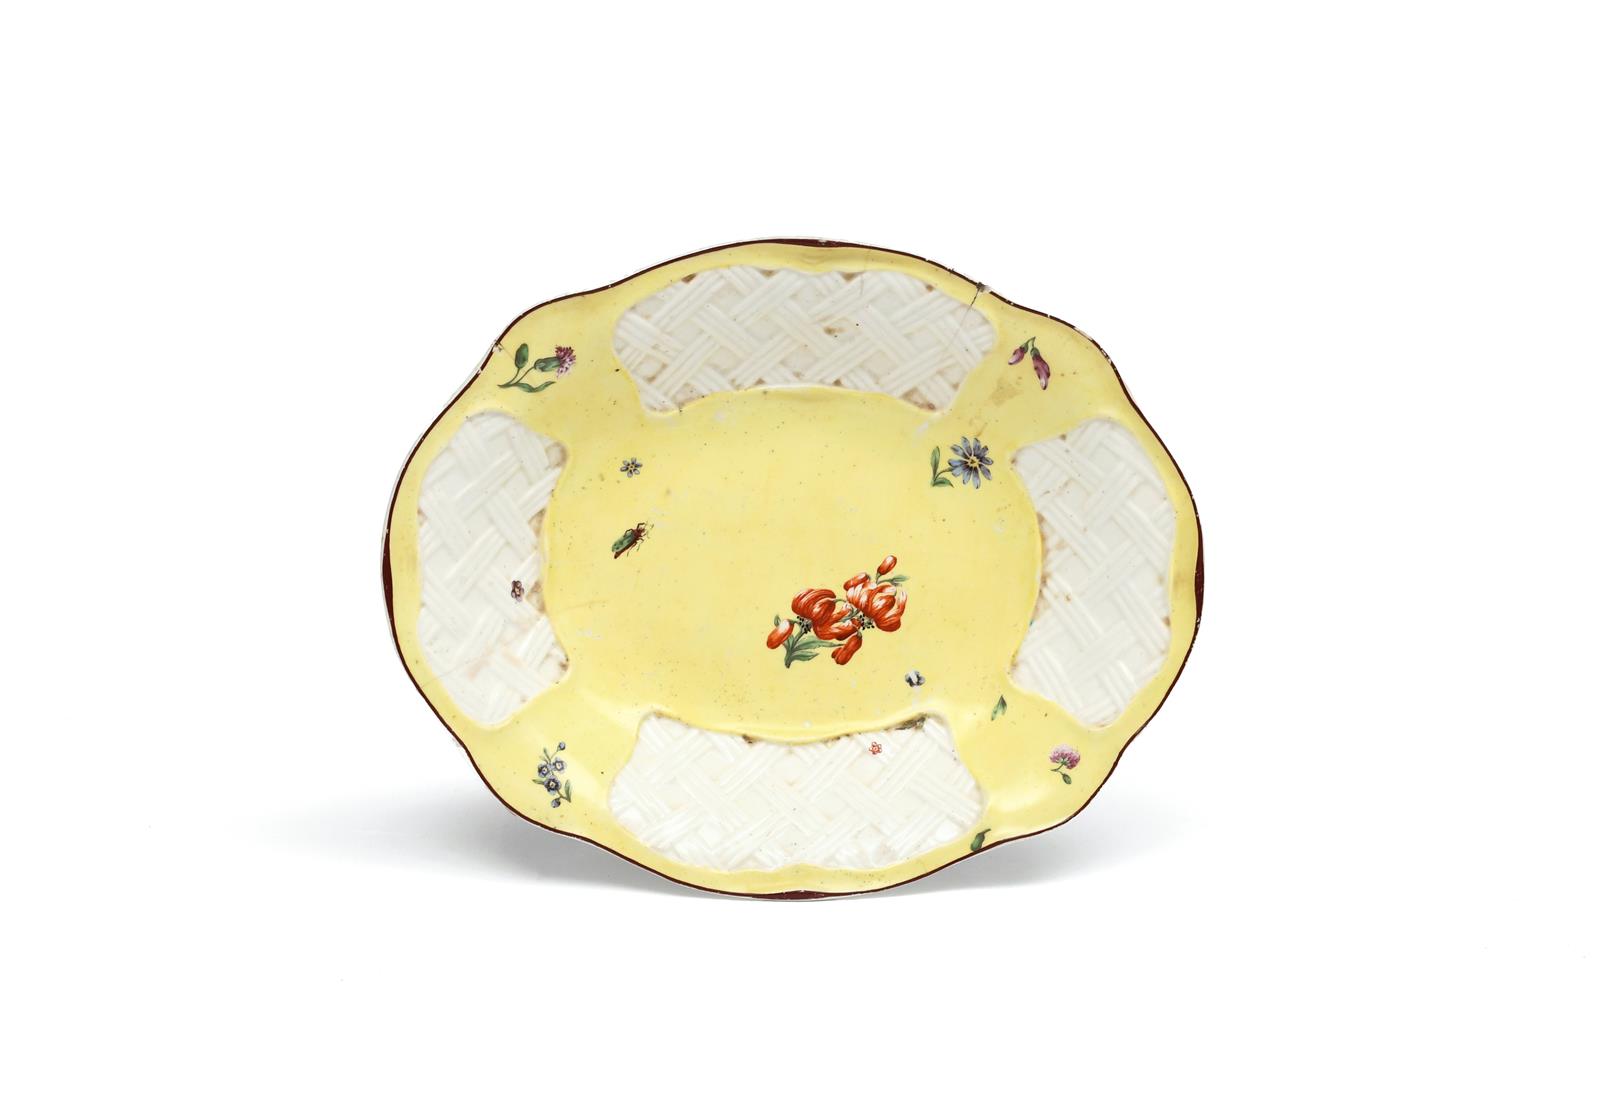 A Chelsea basket dish c.1755, painted with small scattered flower sprigs, the sides with four